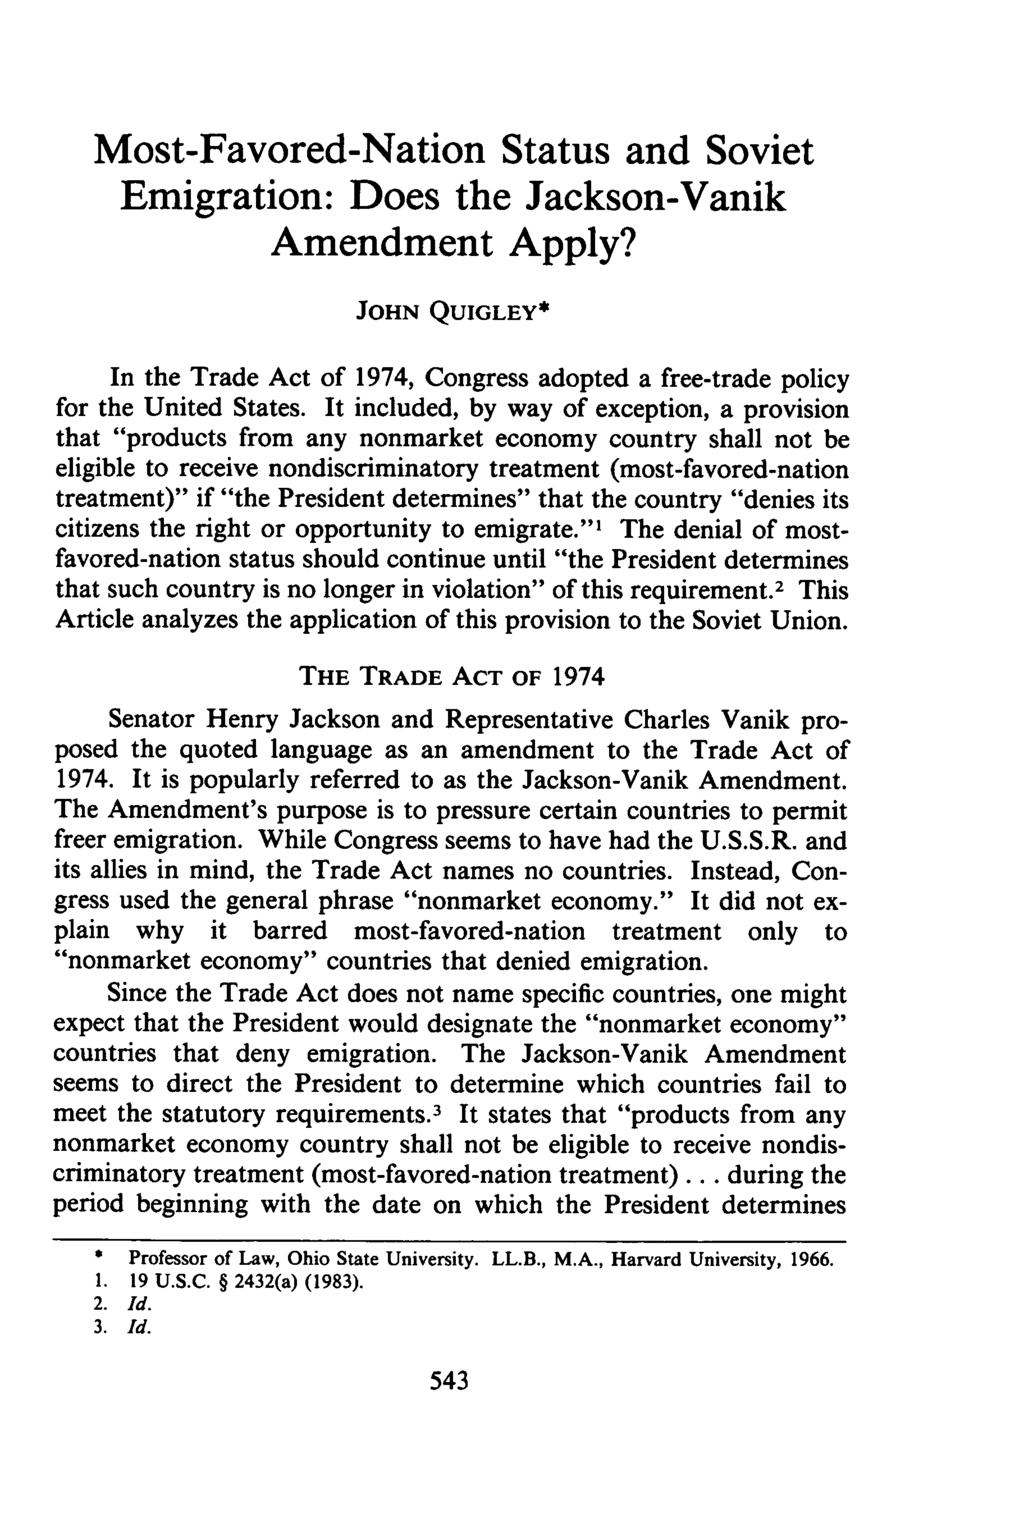 Most-Favored-Nation Status and Soviet Emigration: Does the Jackson-Vanik Amendment Apply? JOHN QUIGLEY* In the Trade Act of 1974, Congress adopted a free-trade policy for the United States.